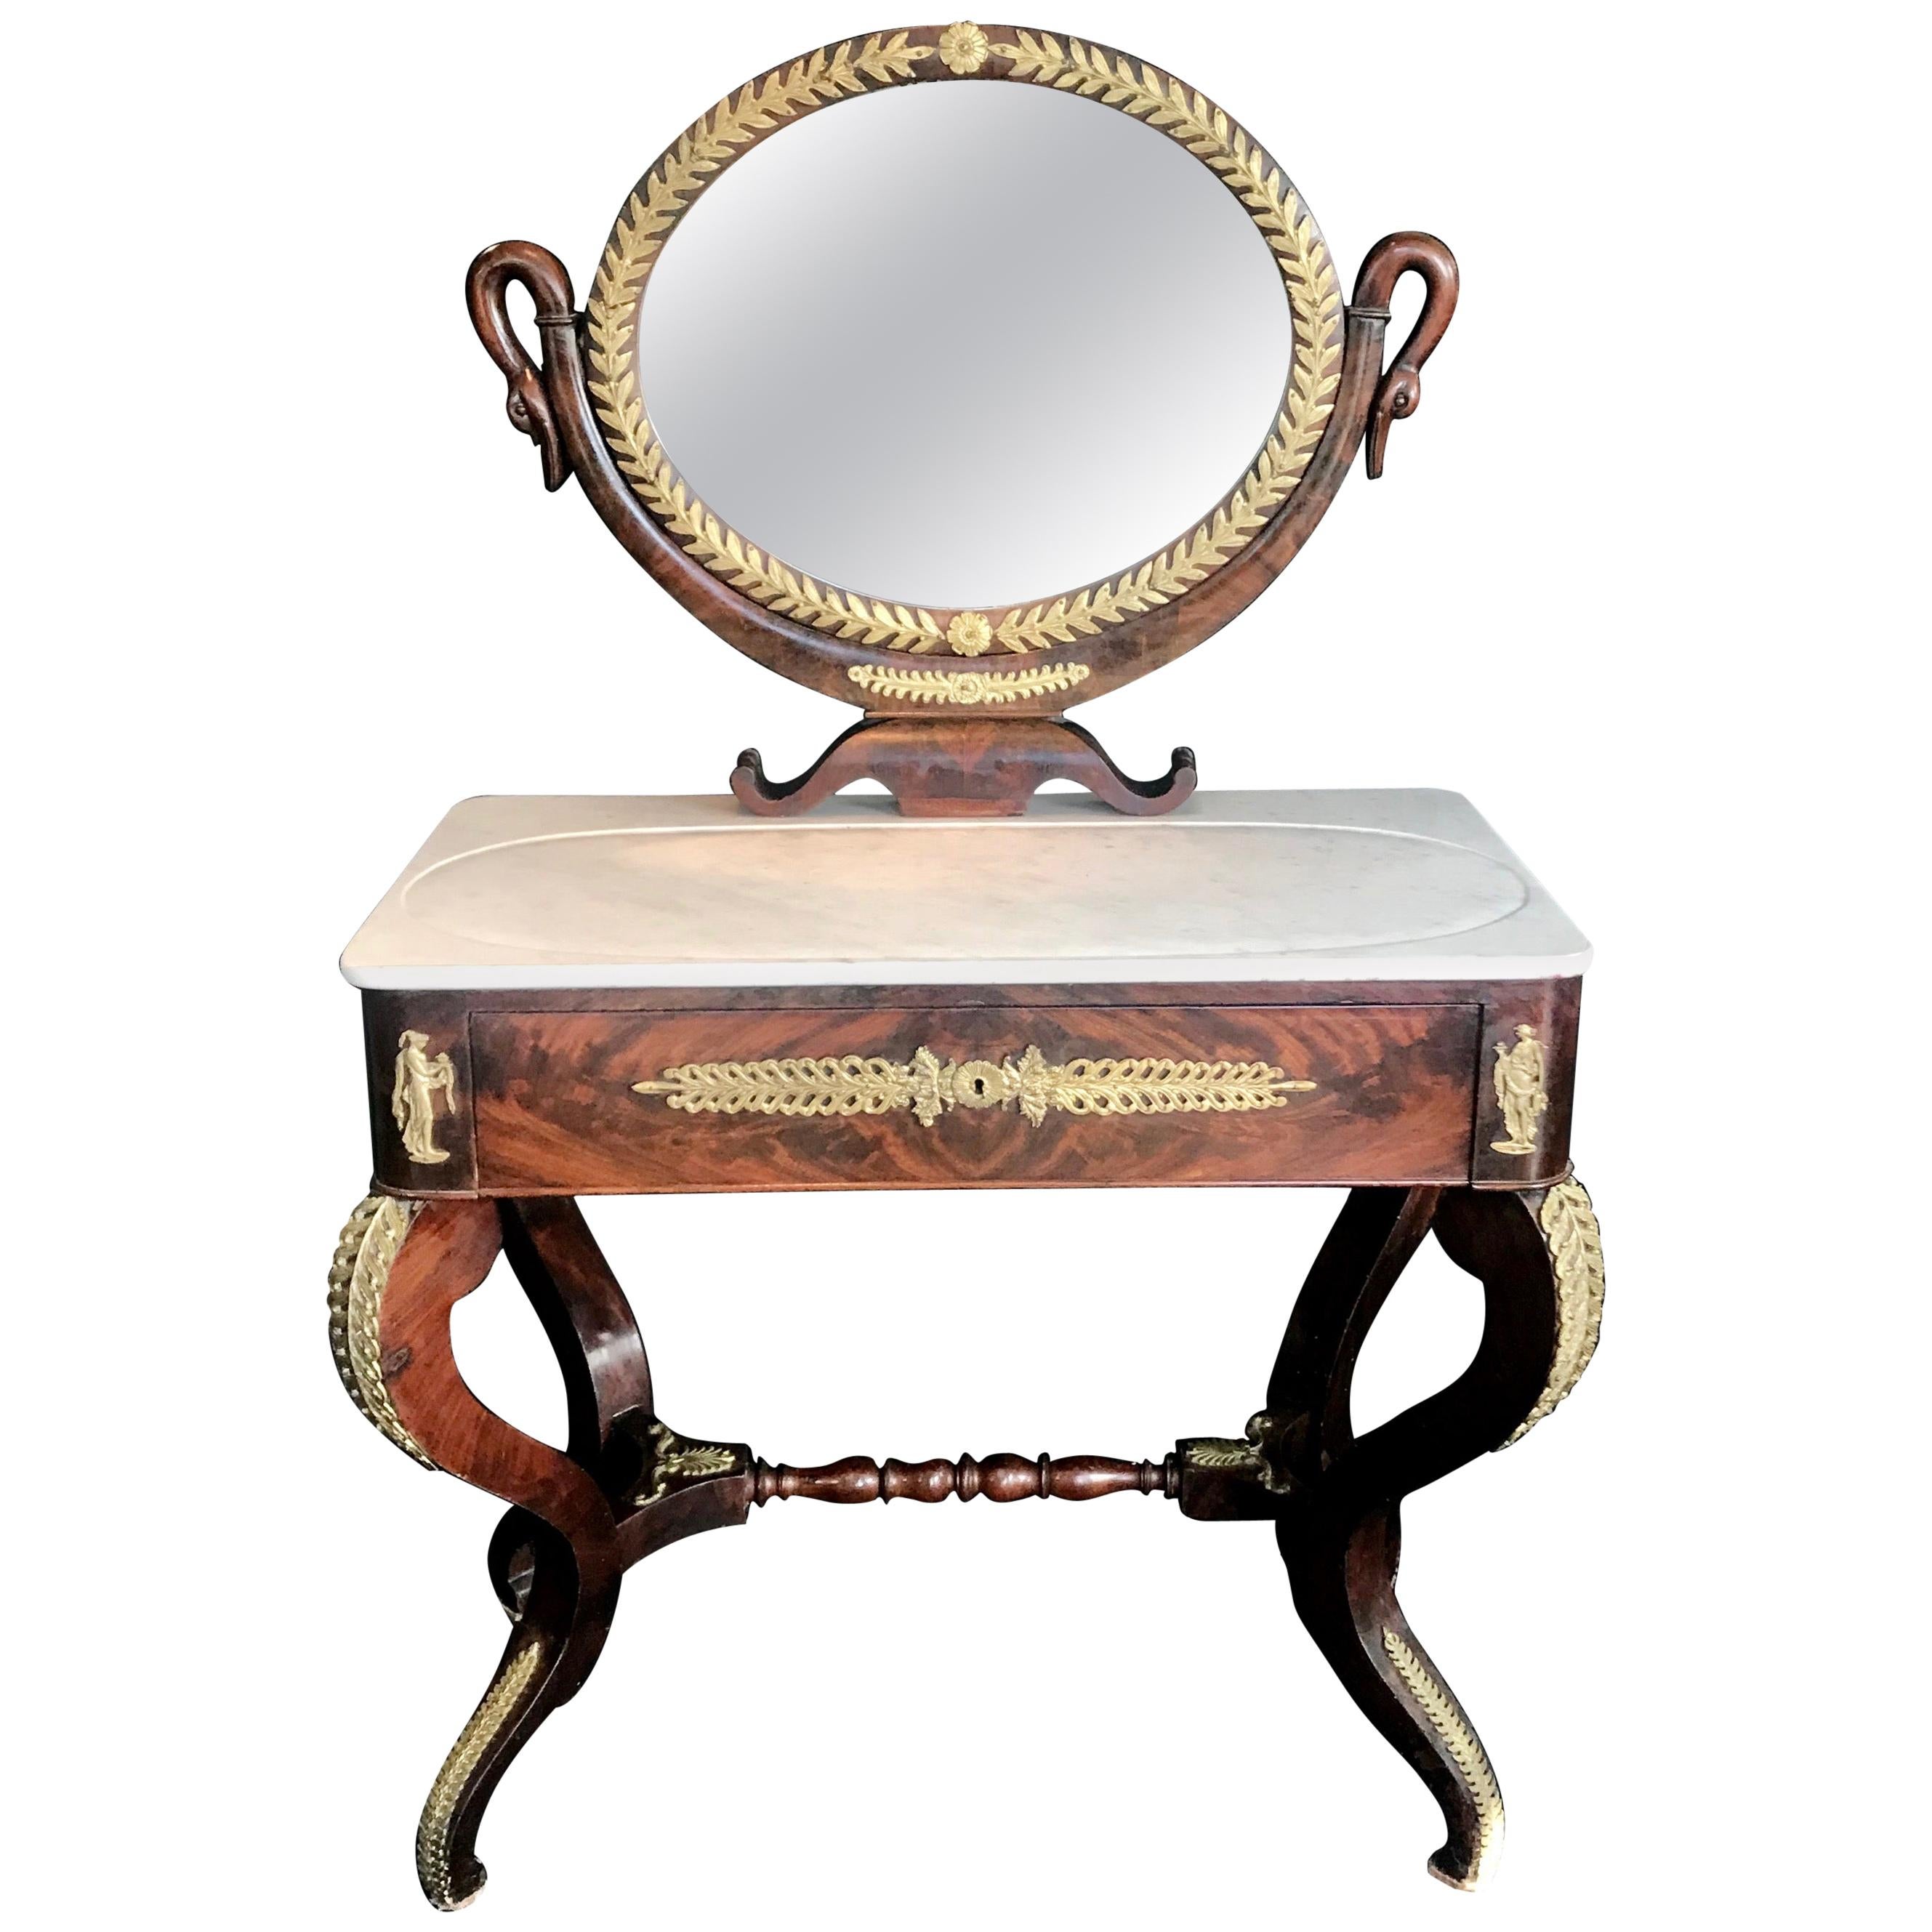 Superb 19th Century French Empire Neoclassical Mahogany Dressing Table Vanity